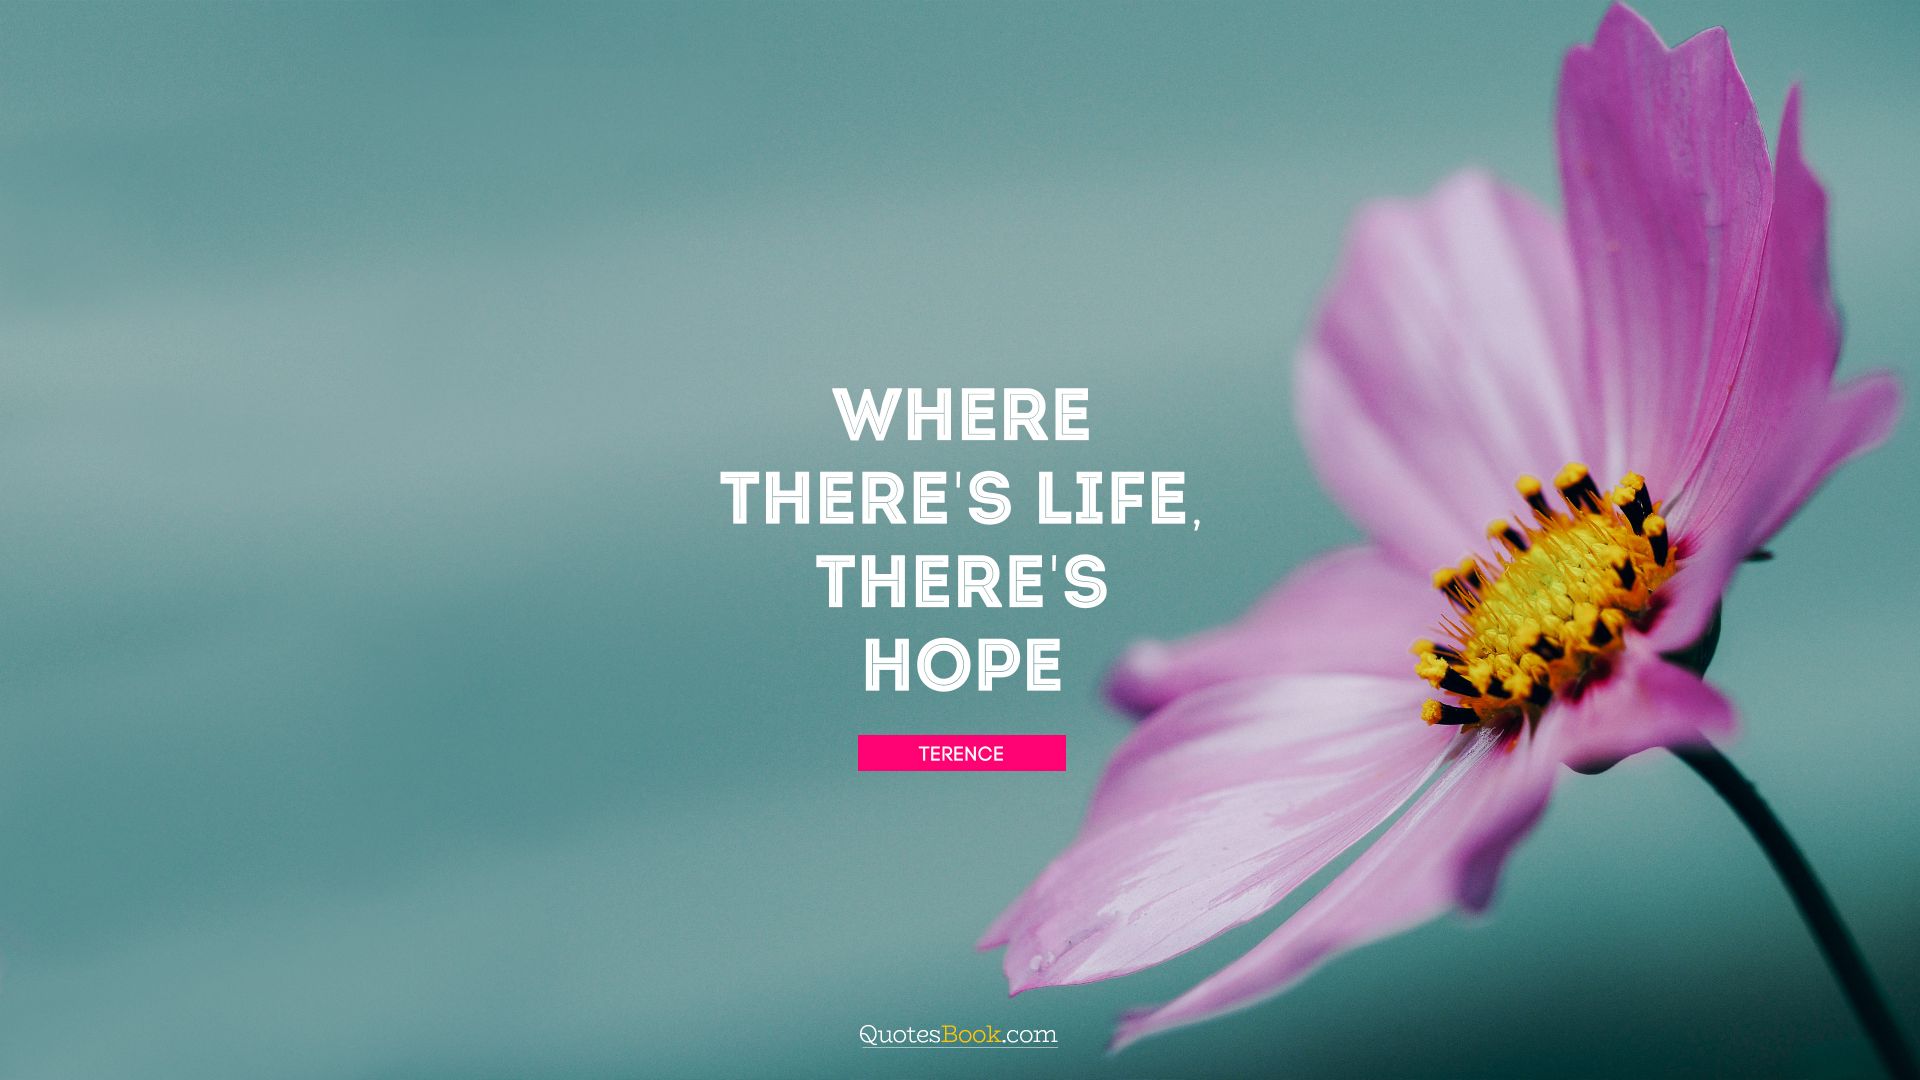 Where there's life, there's hope. - Quote by Terence